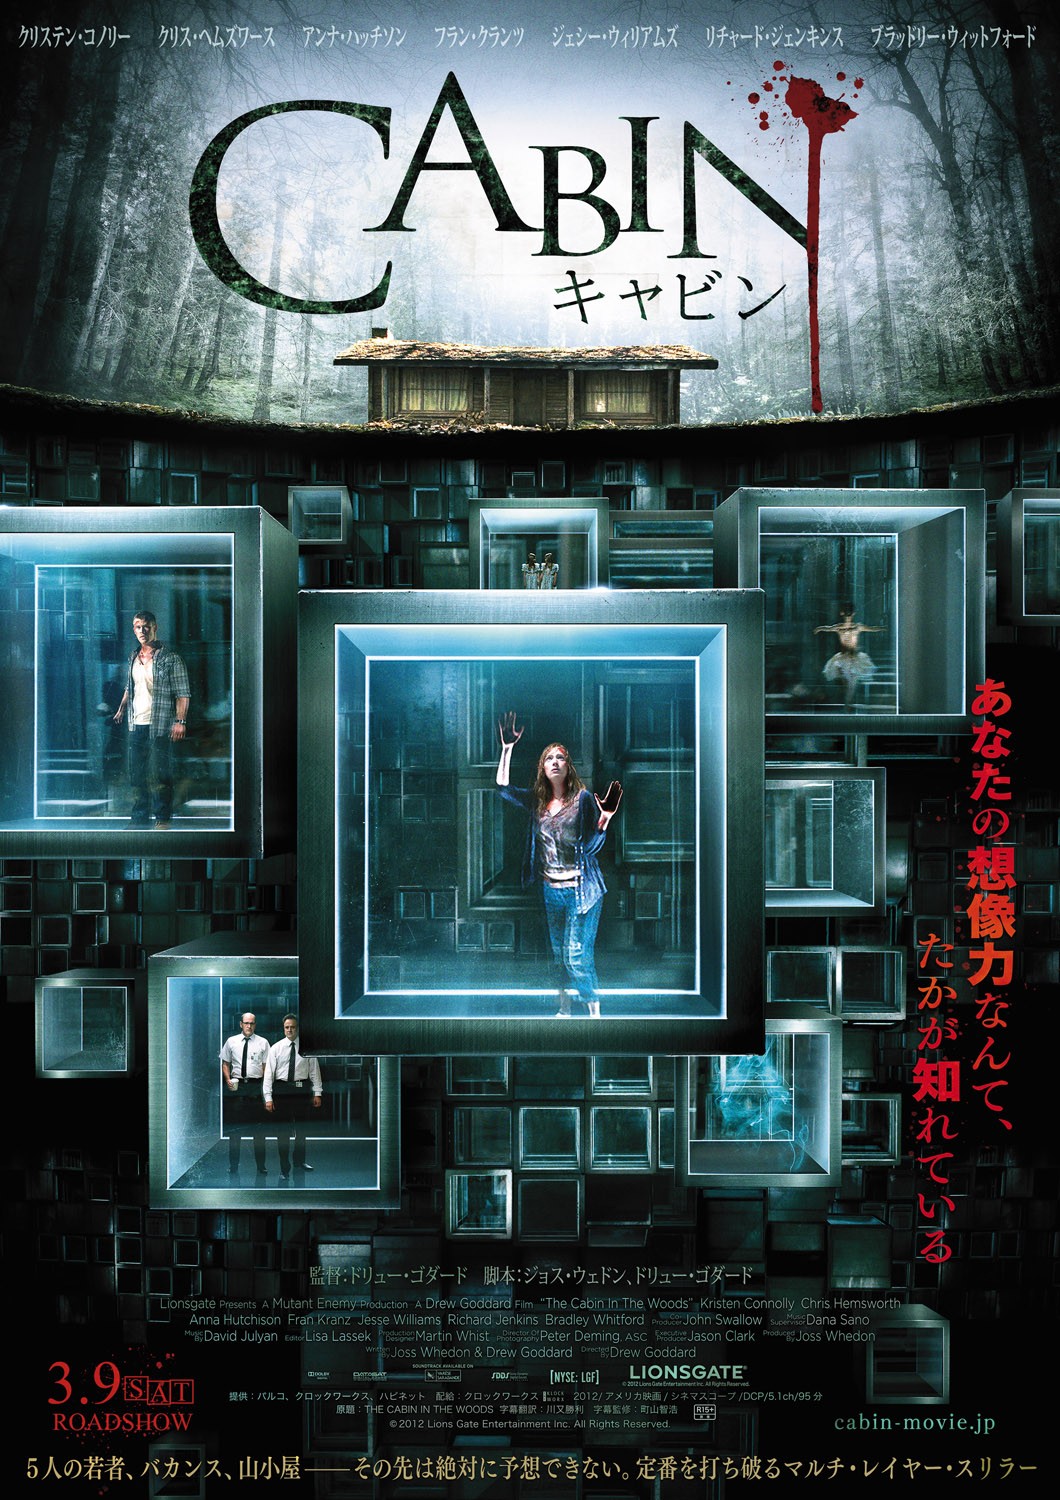 News Bites Kilometer 31 Sequel Japanese Posters For Cabin In The Woods And Storge 24 Bloody Disgusting